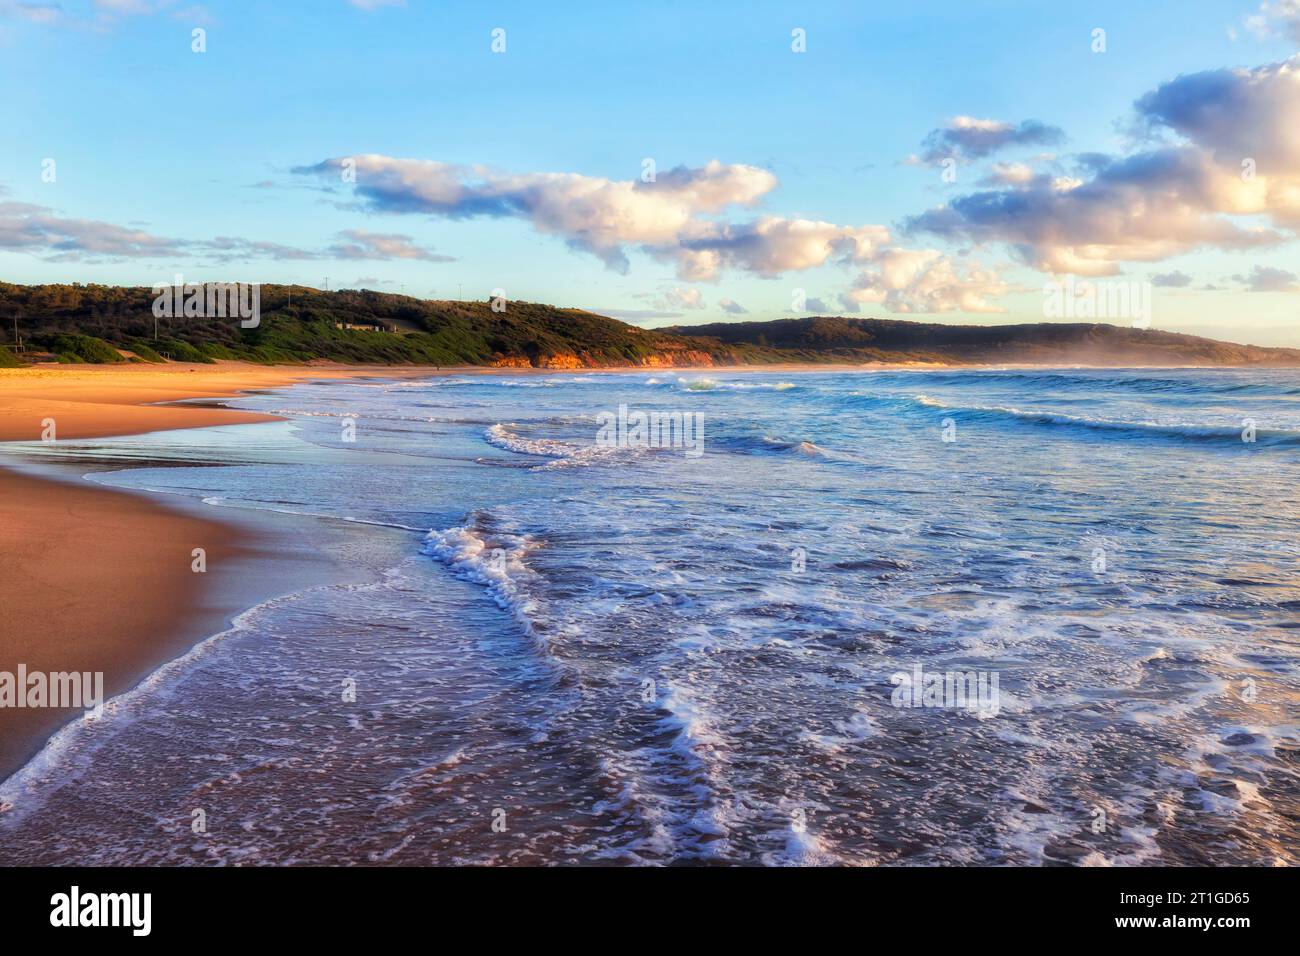 Middle Camp beach at Catherine Hill bay coastal town of Australia on Pacific ocean - soft morning light. Stock Photo